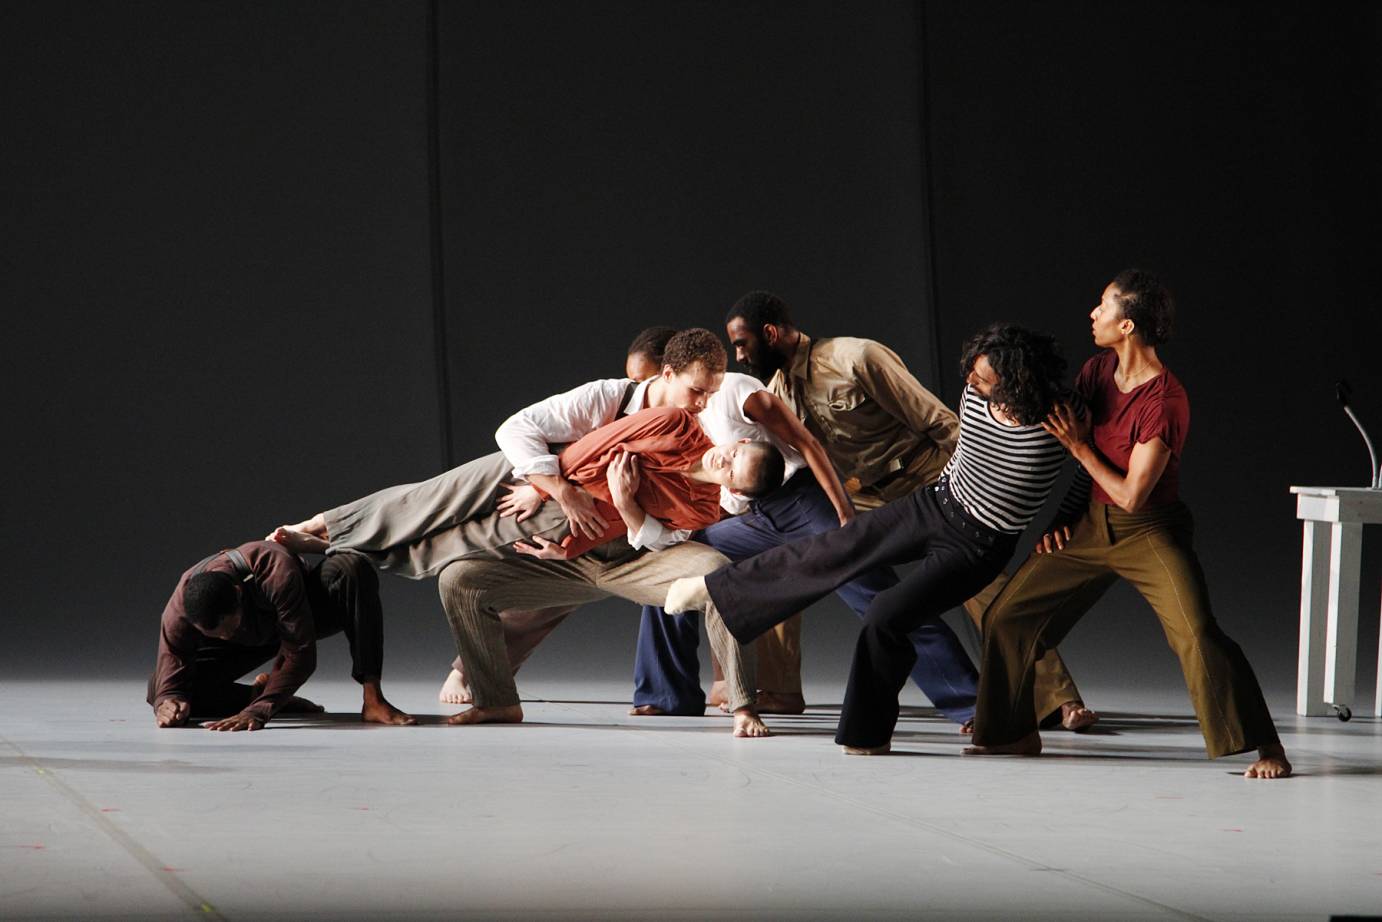 Dancers form a cascading chain with their bodies. They lean on one another. One dancer is held horizontally by the group.